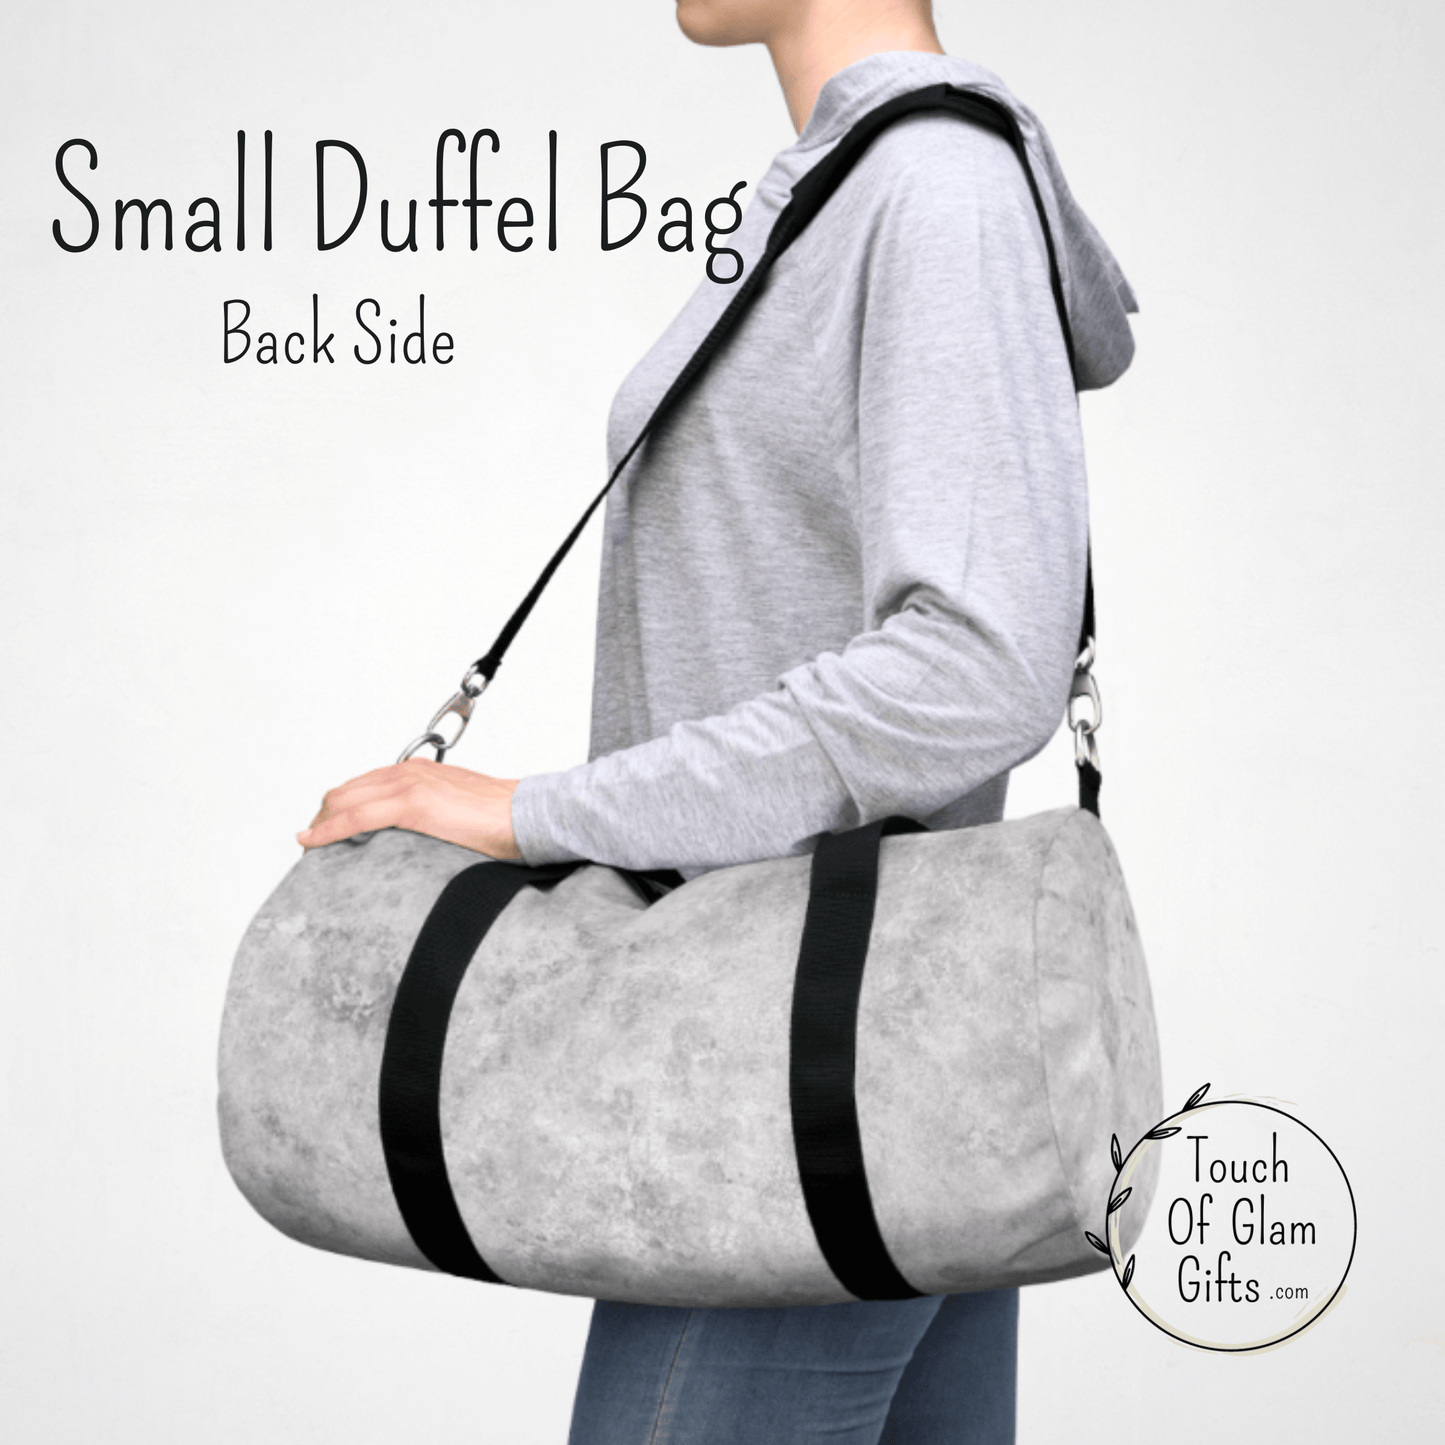 This light grey monogrammed duffel bag is perfect for women too.  A classy weekend bag thats personalized with your initials.